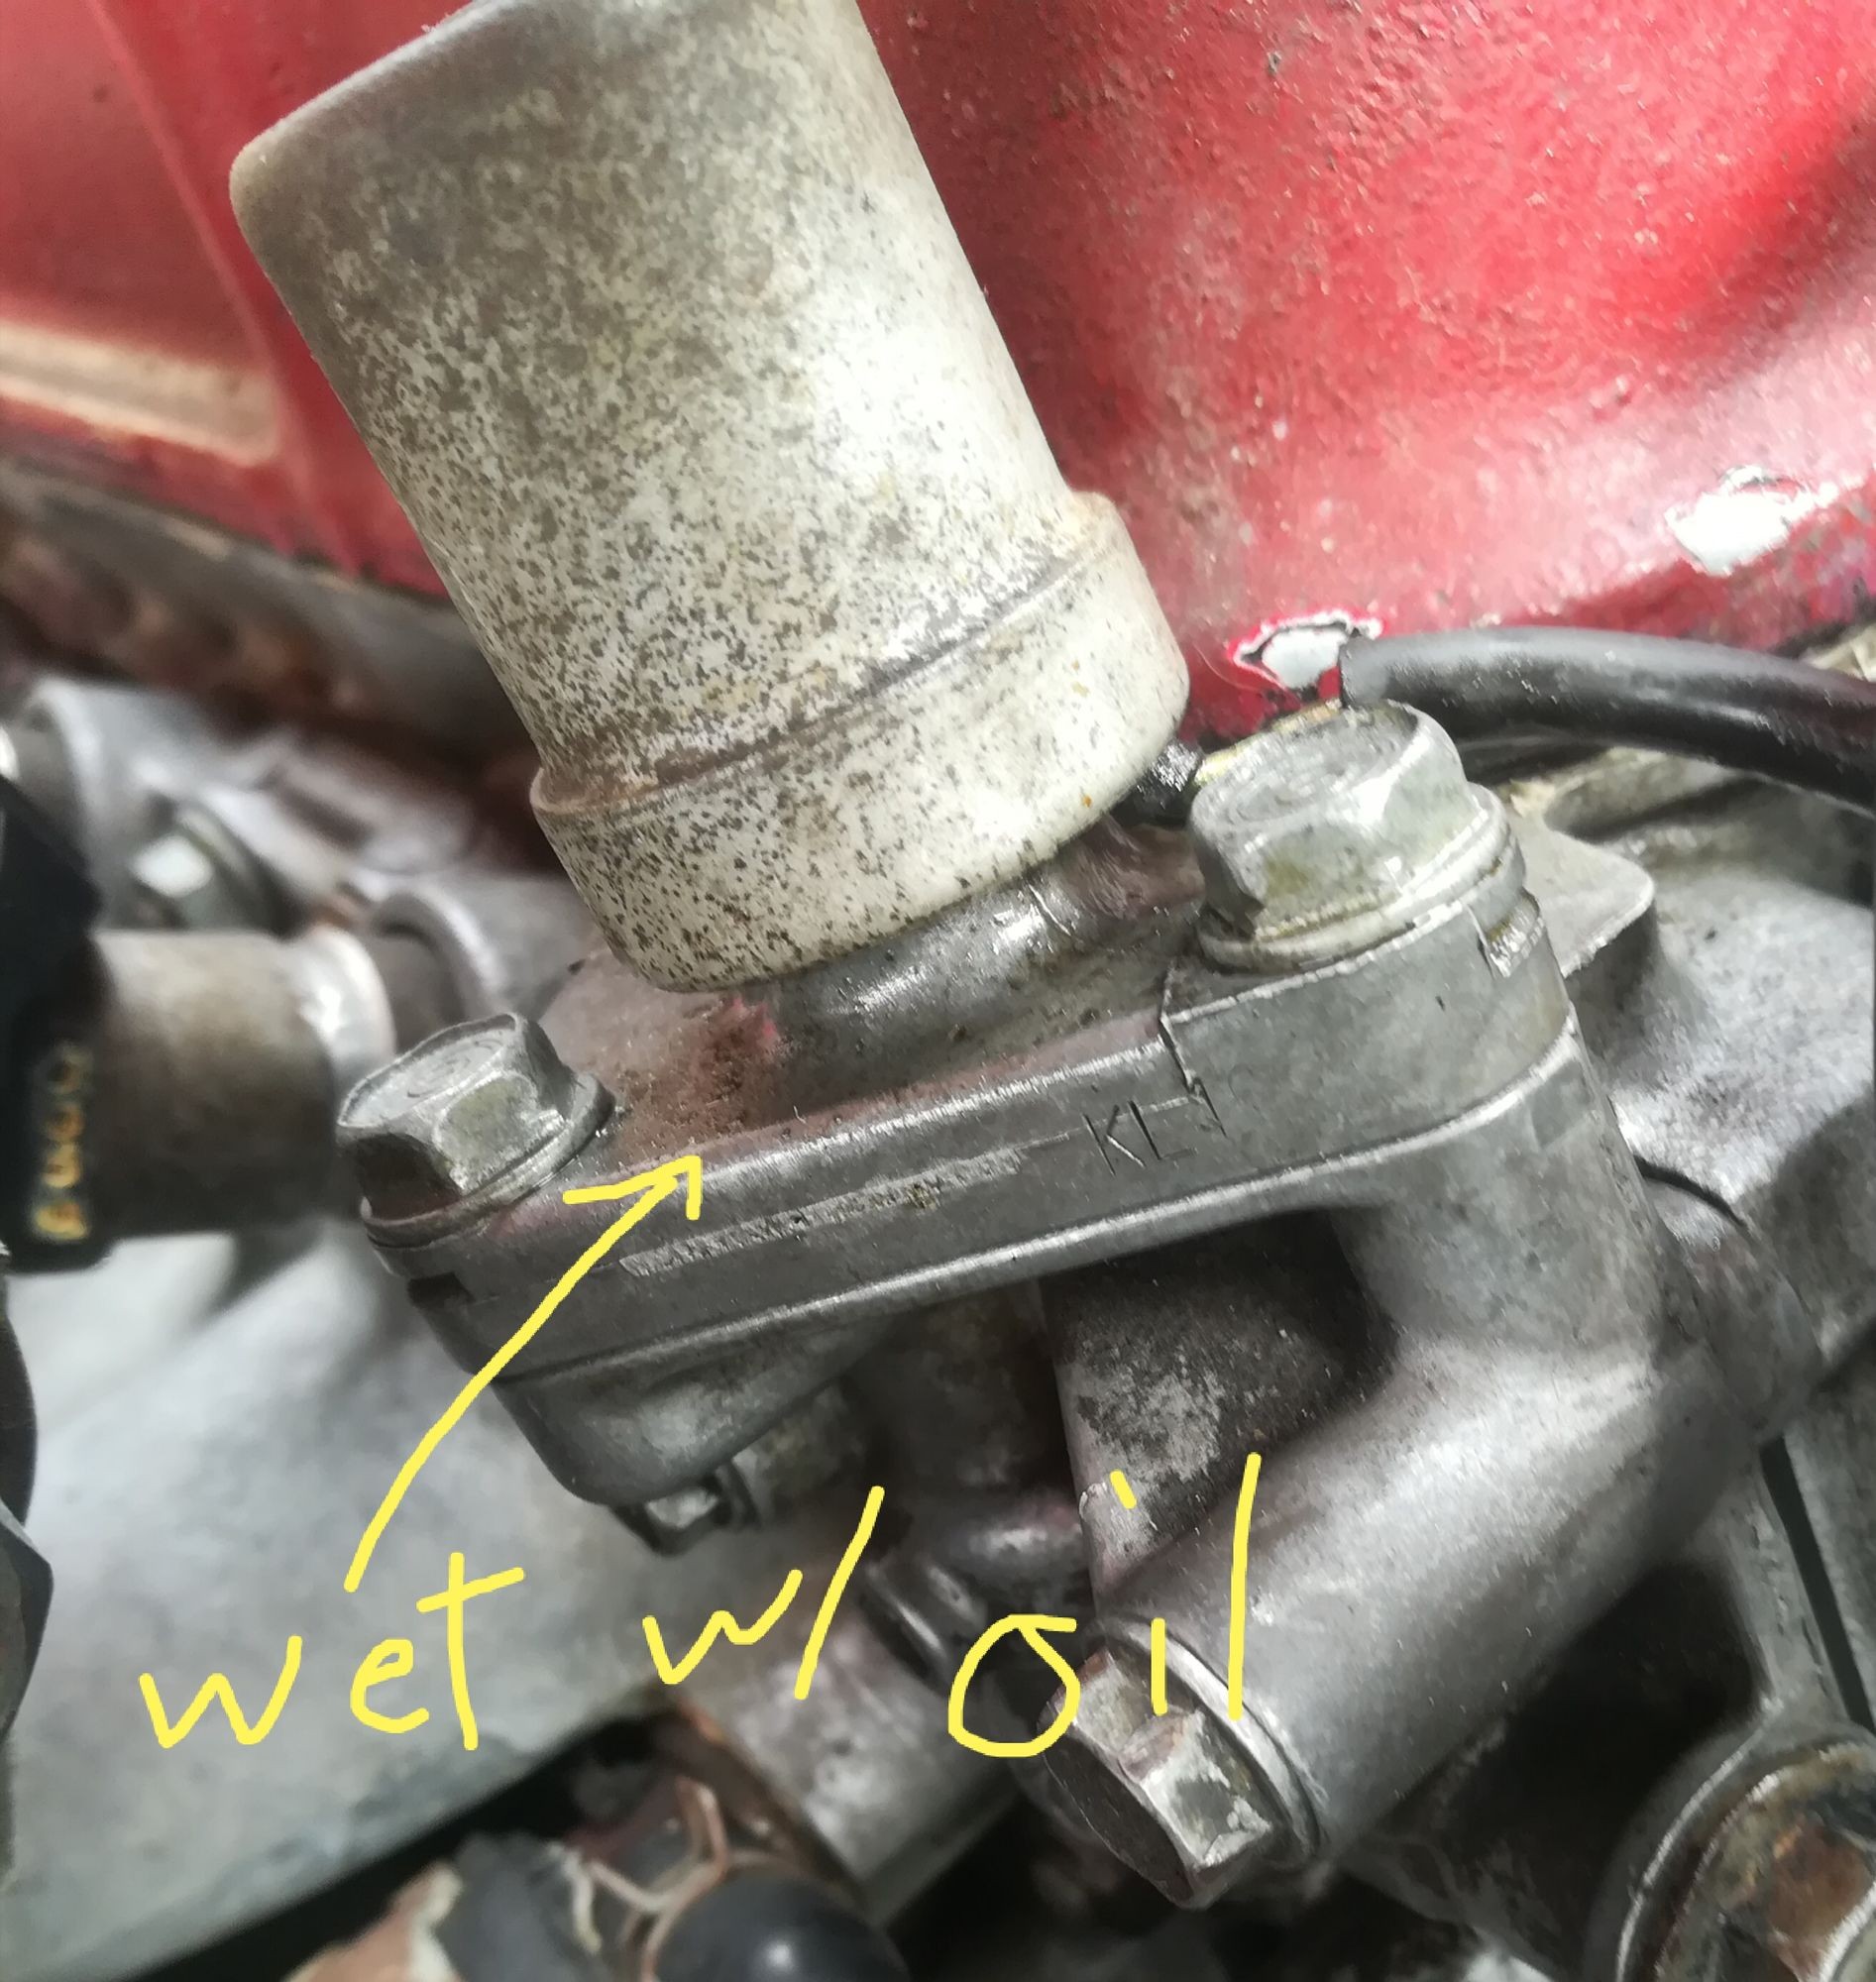 Vtec solenoid Wire Leaking Oil Oil Leak In Vtec solenoid Ing From the Wire Any Fix Honda Tech Honda forum Discussion Of Vtec solenoid Wire Leaking Oil